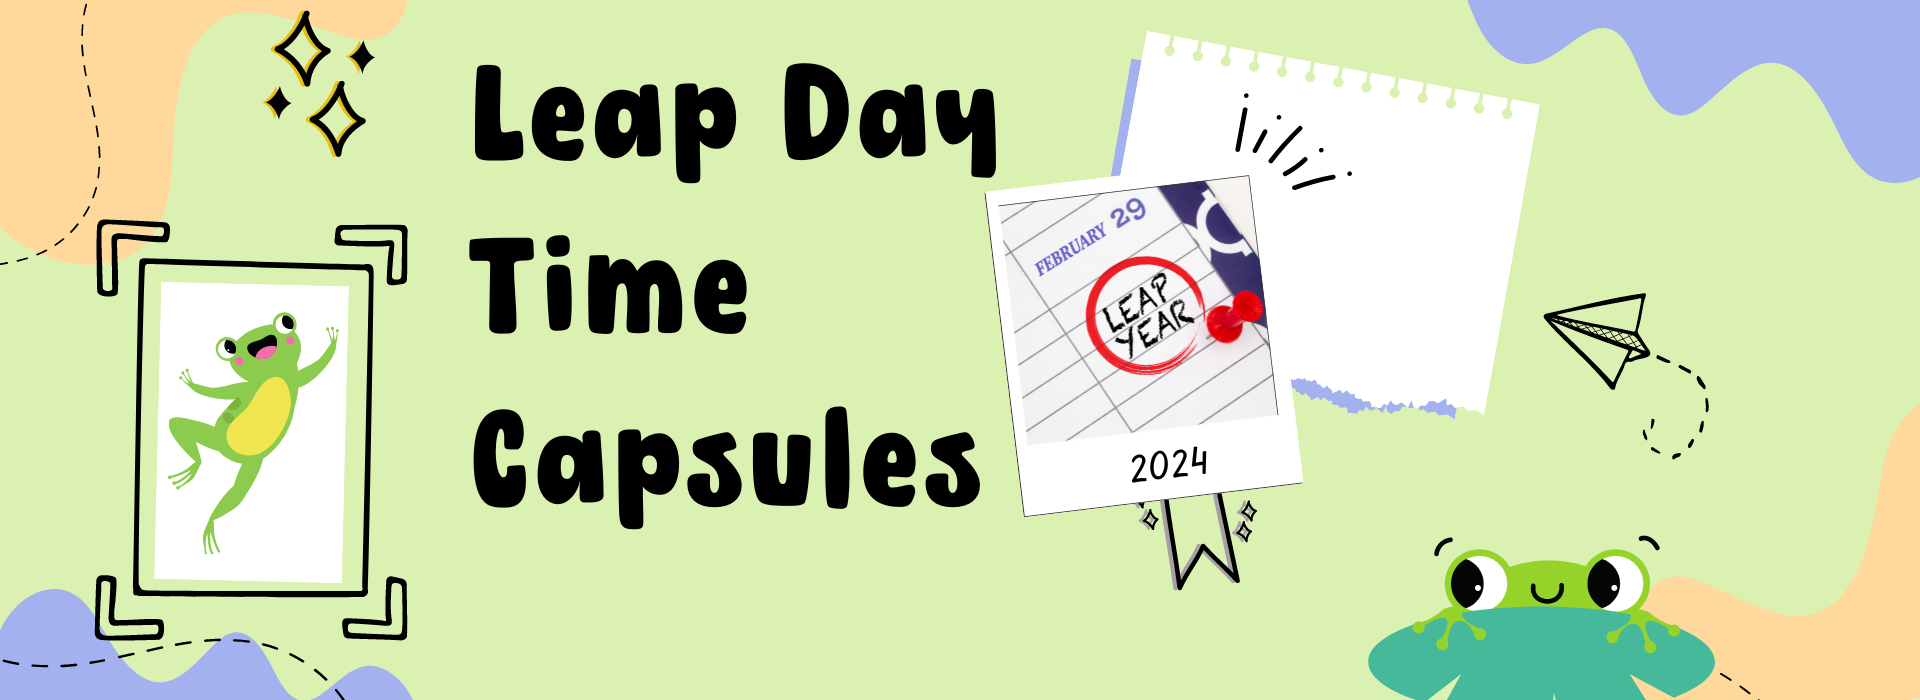 Leap Day Time Capsule Making for ages 6-12